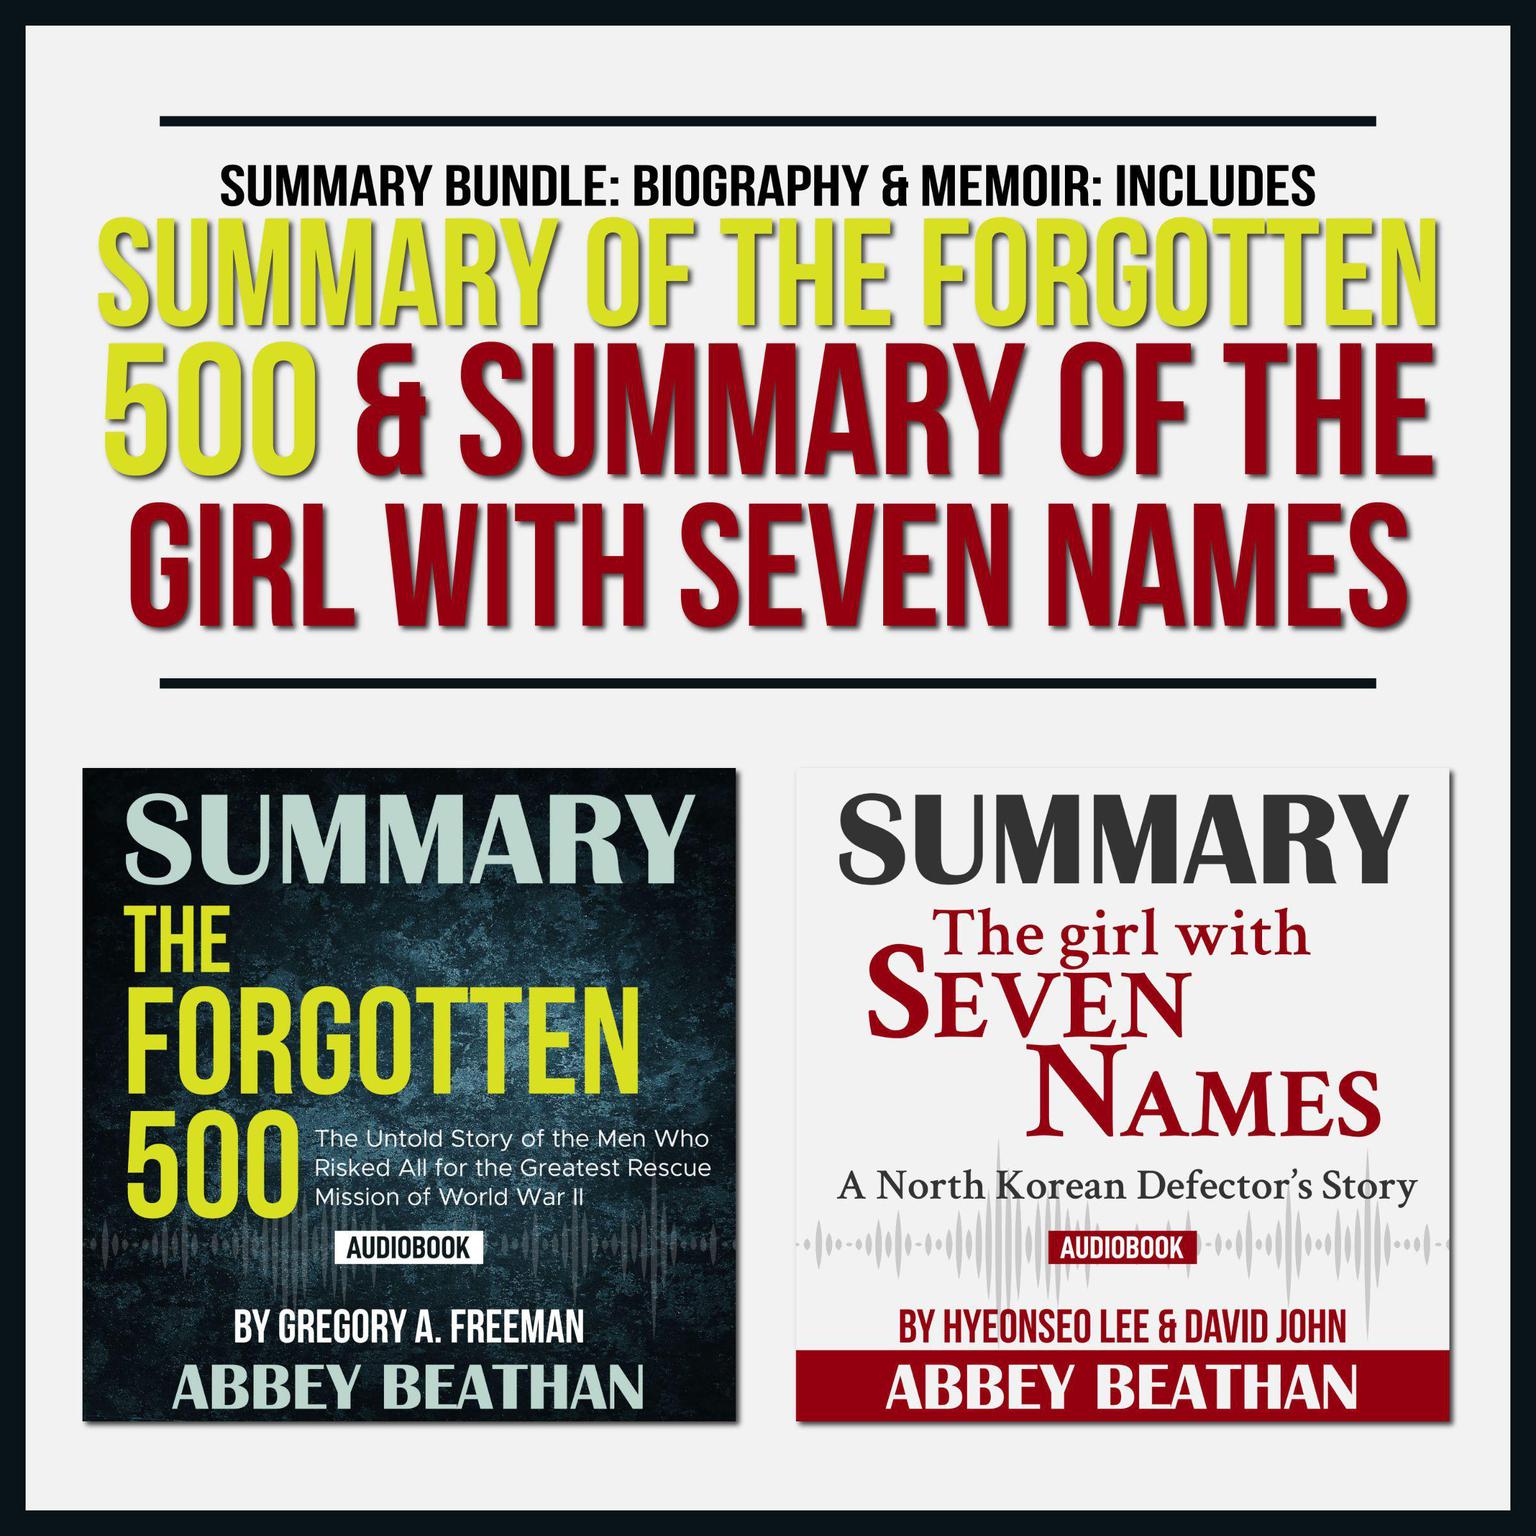 Summary Bundle: Biography & Memoir: Includes Summary of The Forgotten 500 & Summary of The Girl with Seven Names Audiobook, by Abbey Beathan